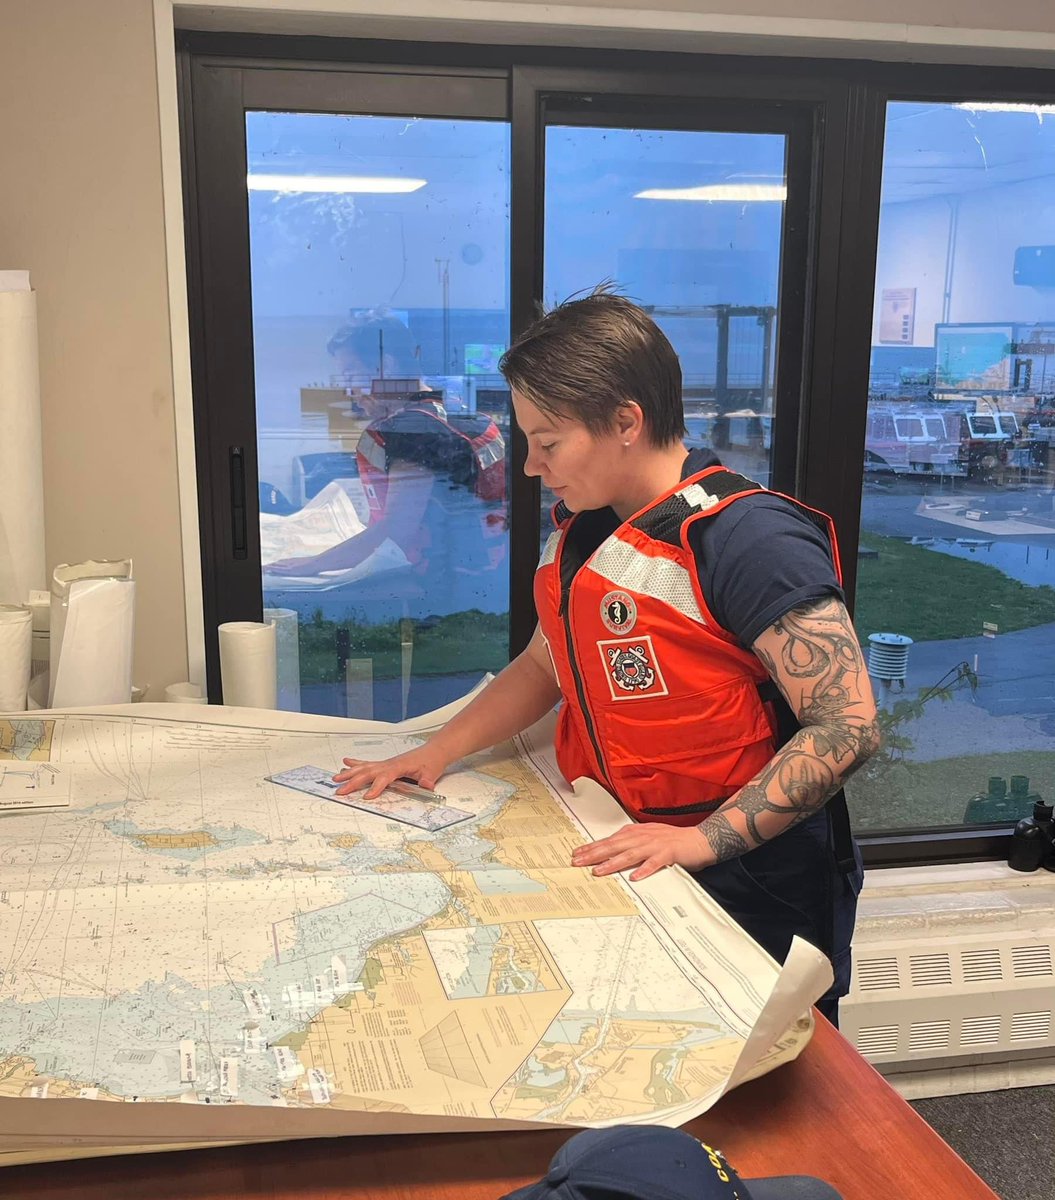 It’s “National Wear Your Lifejacket to Work Day!” 🛟

Join us as we kick off National Safe Boating Week, May 18-24th!

#USCG STA Marblehead is participating  in the effort to encourage everyone to wear a life jacket while in/around the water.

#WearYourLifeJacketatWork https://t.co/taNjySVhBW